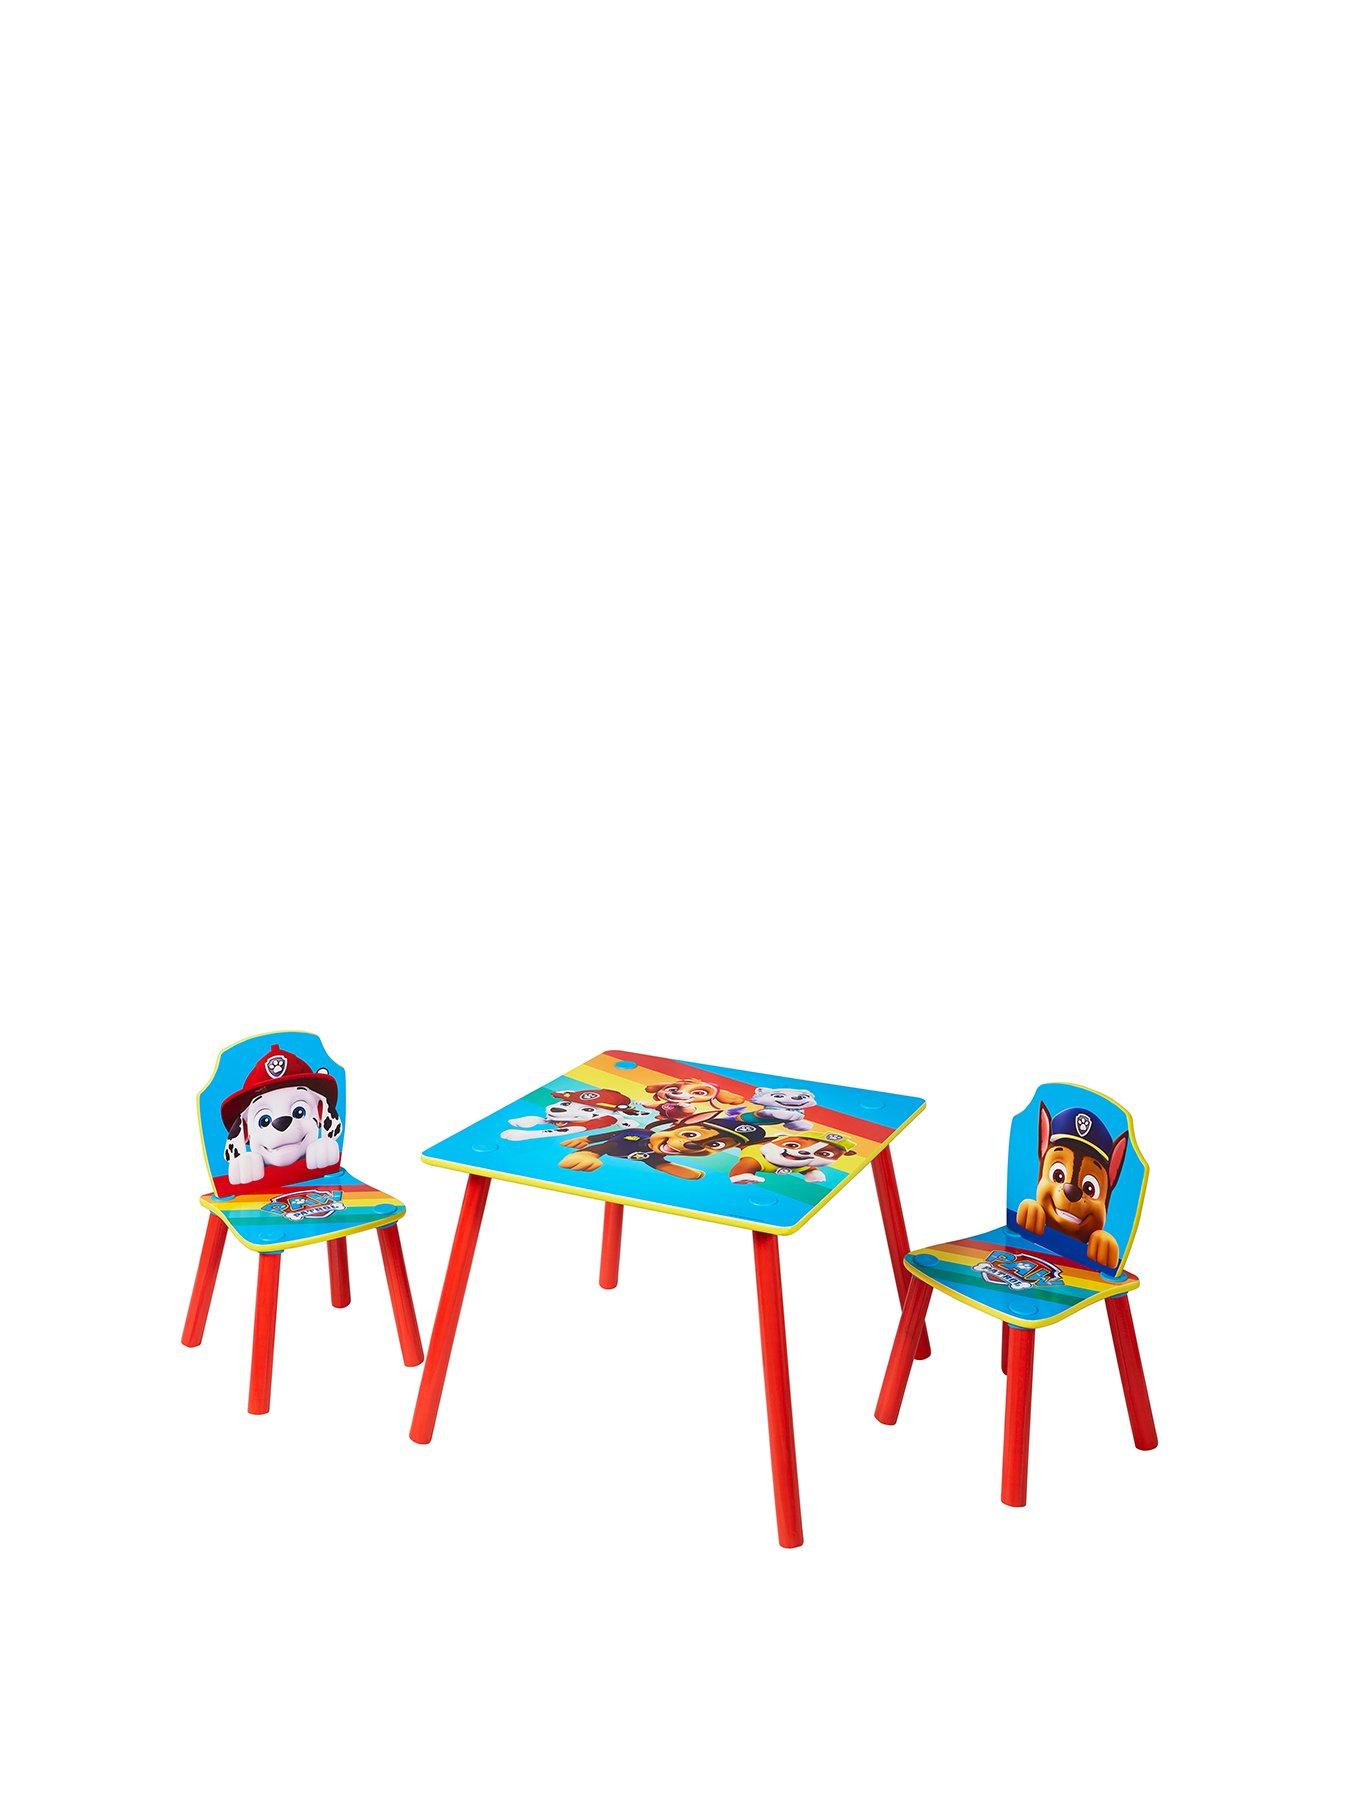 Multicoloured Wood HelloHome Pj Masks Kids Table And 2 Chairs Set 